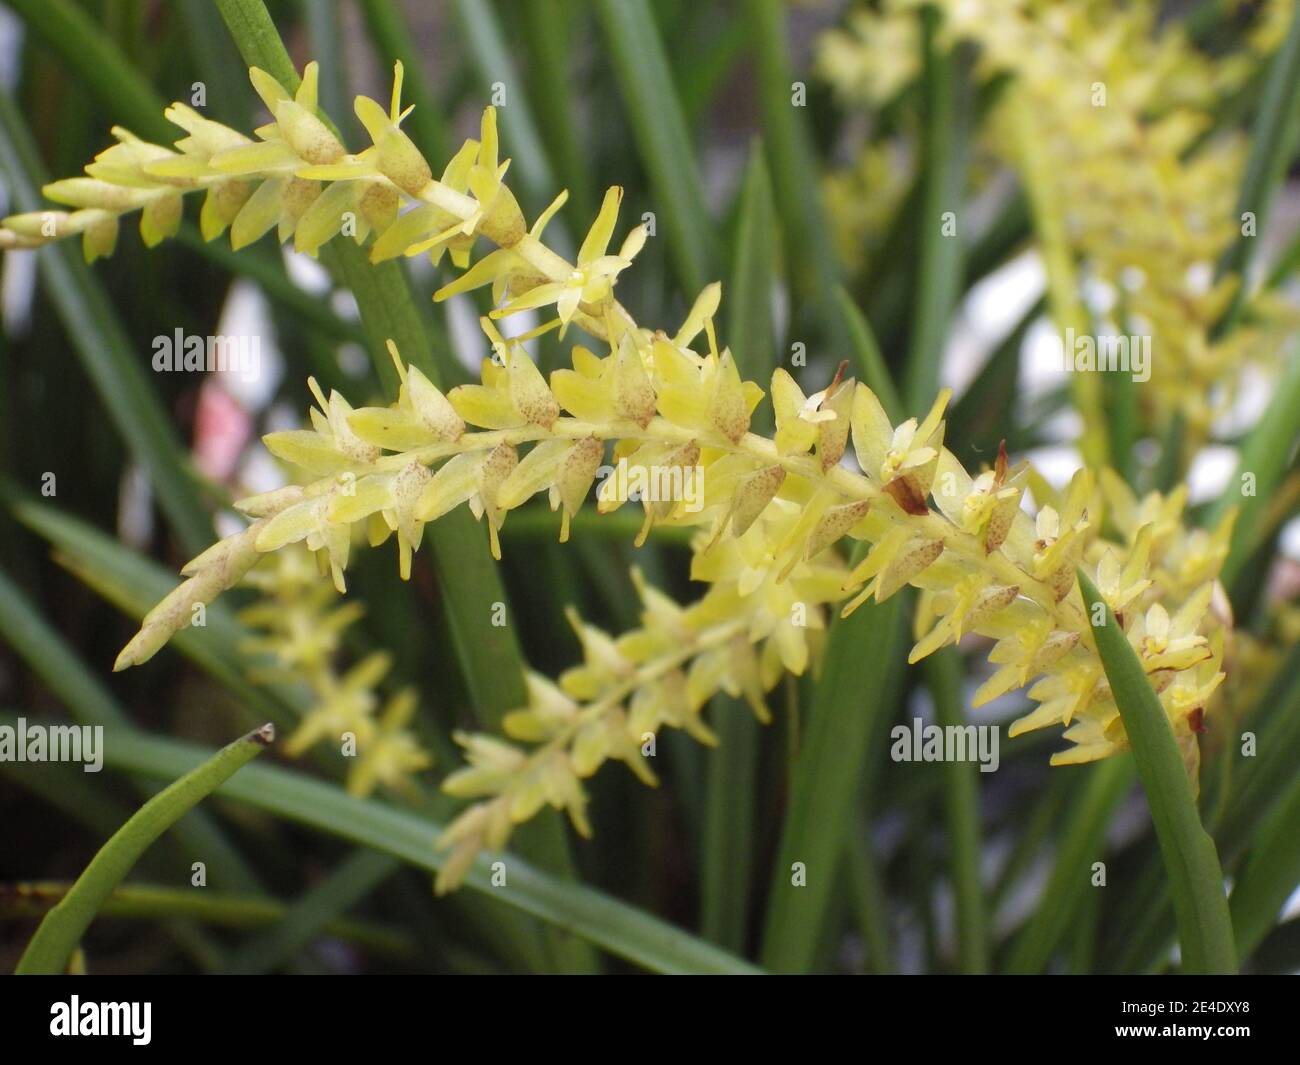 Closeup shot of a long-leaved dendrochilum plant flowers in blossom Stock Photo